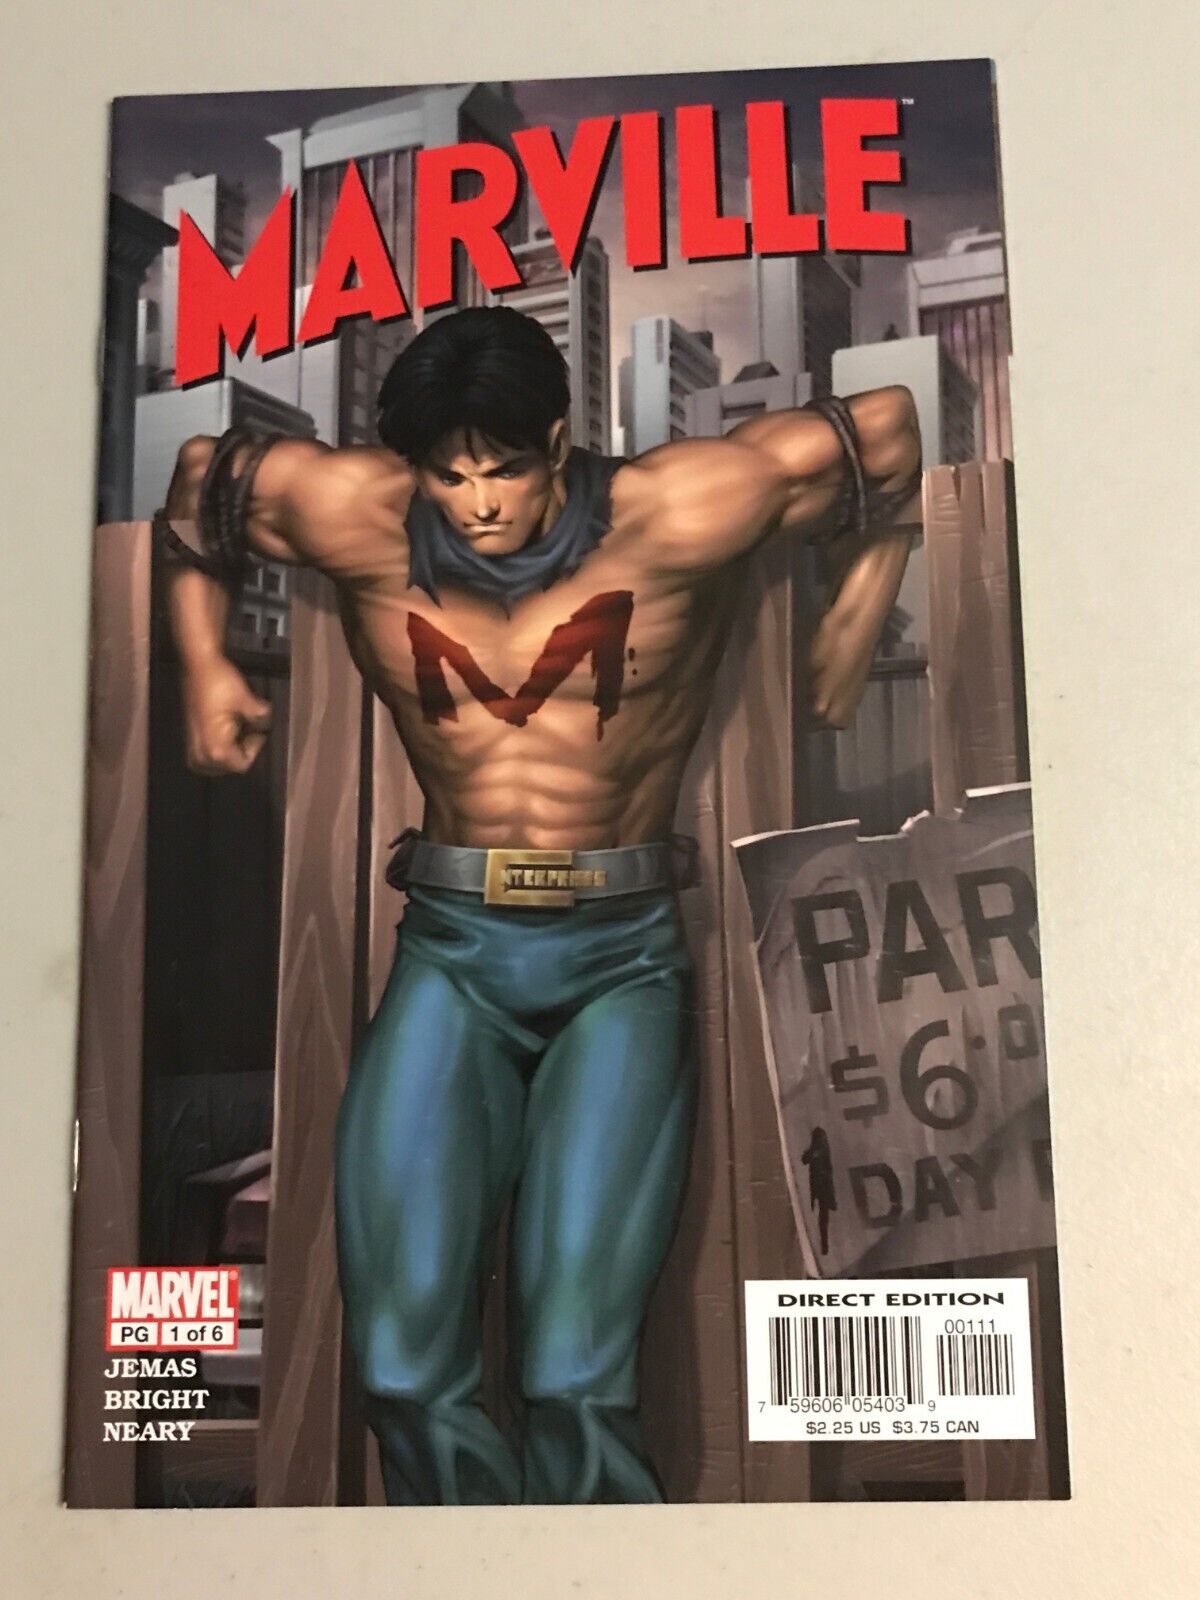 MARVILLE #1 NM MARVEL COMICS 2002 - BACK ISSUE BLOWOUT